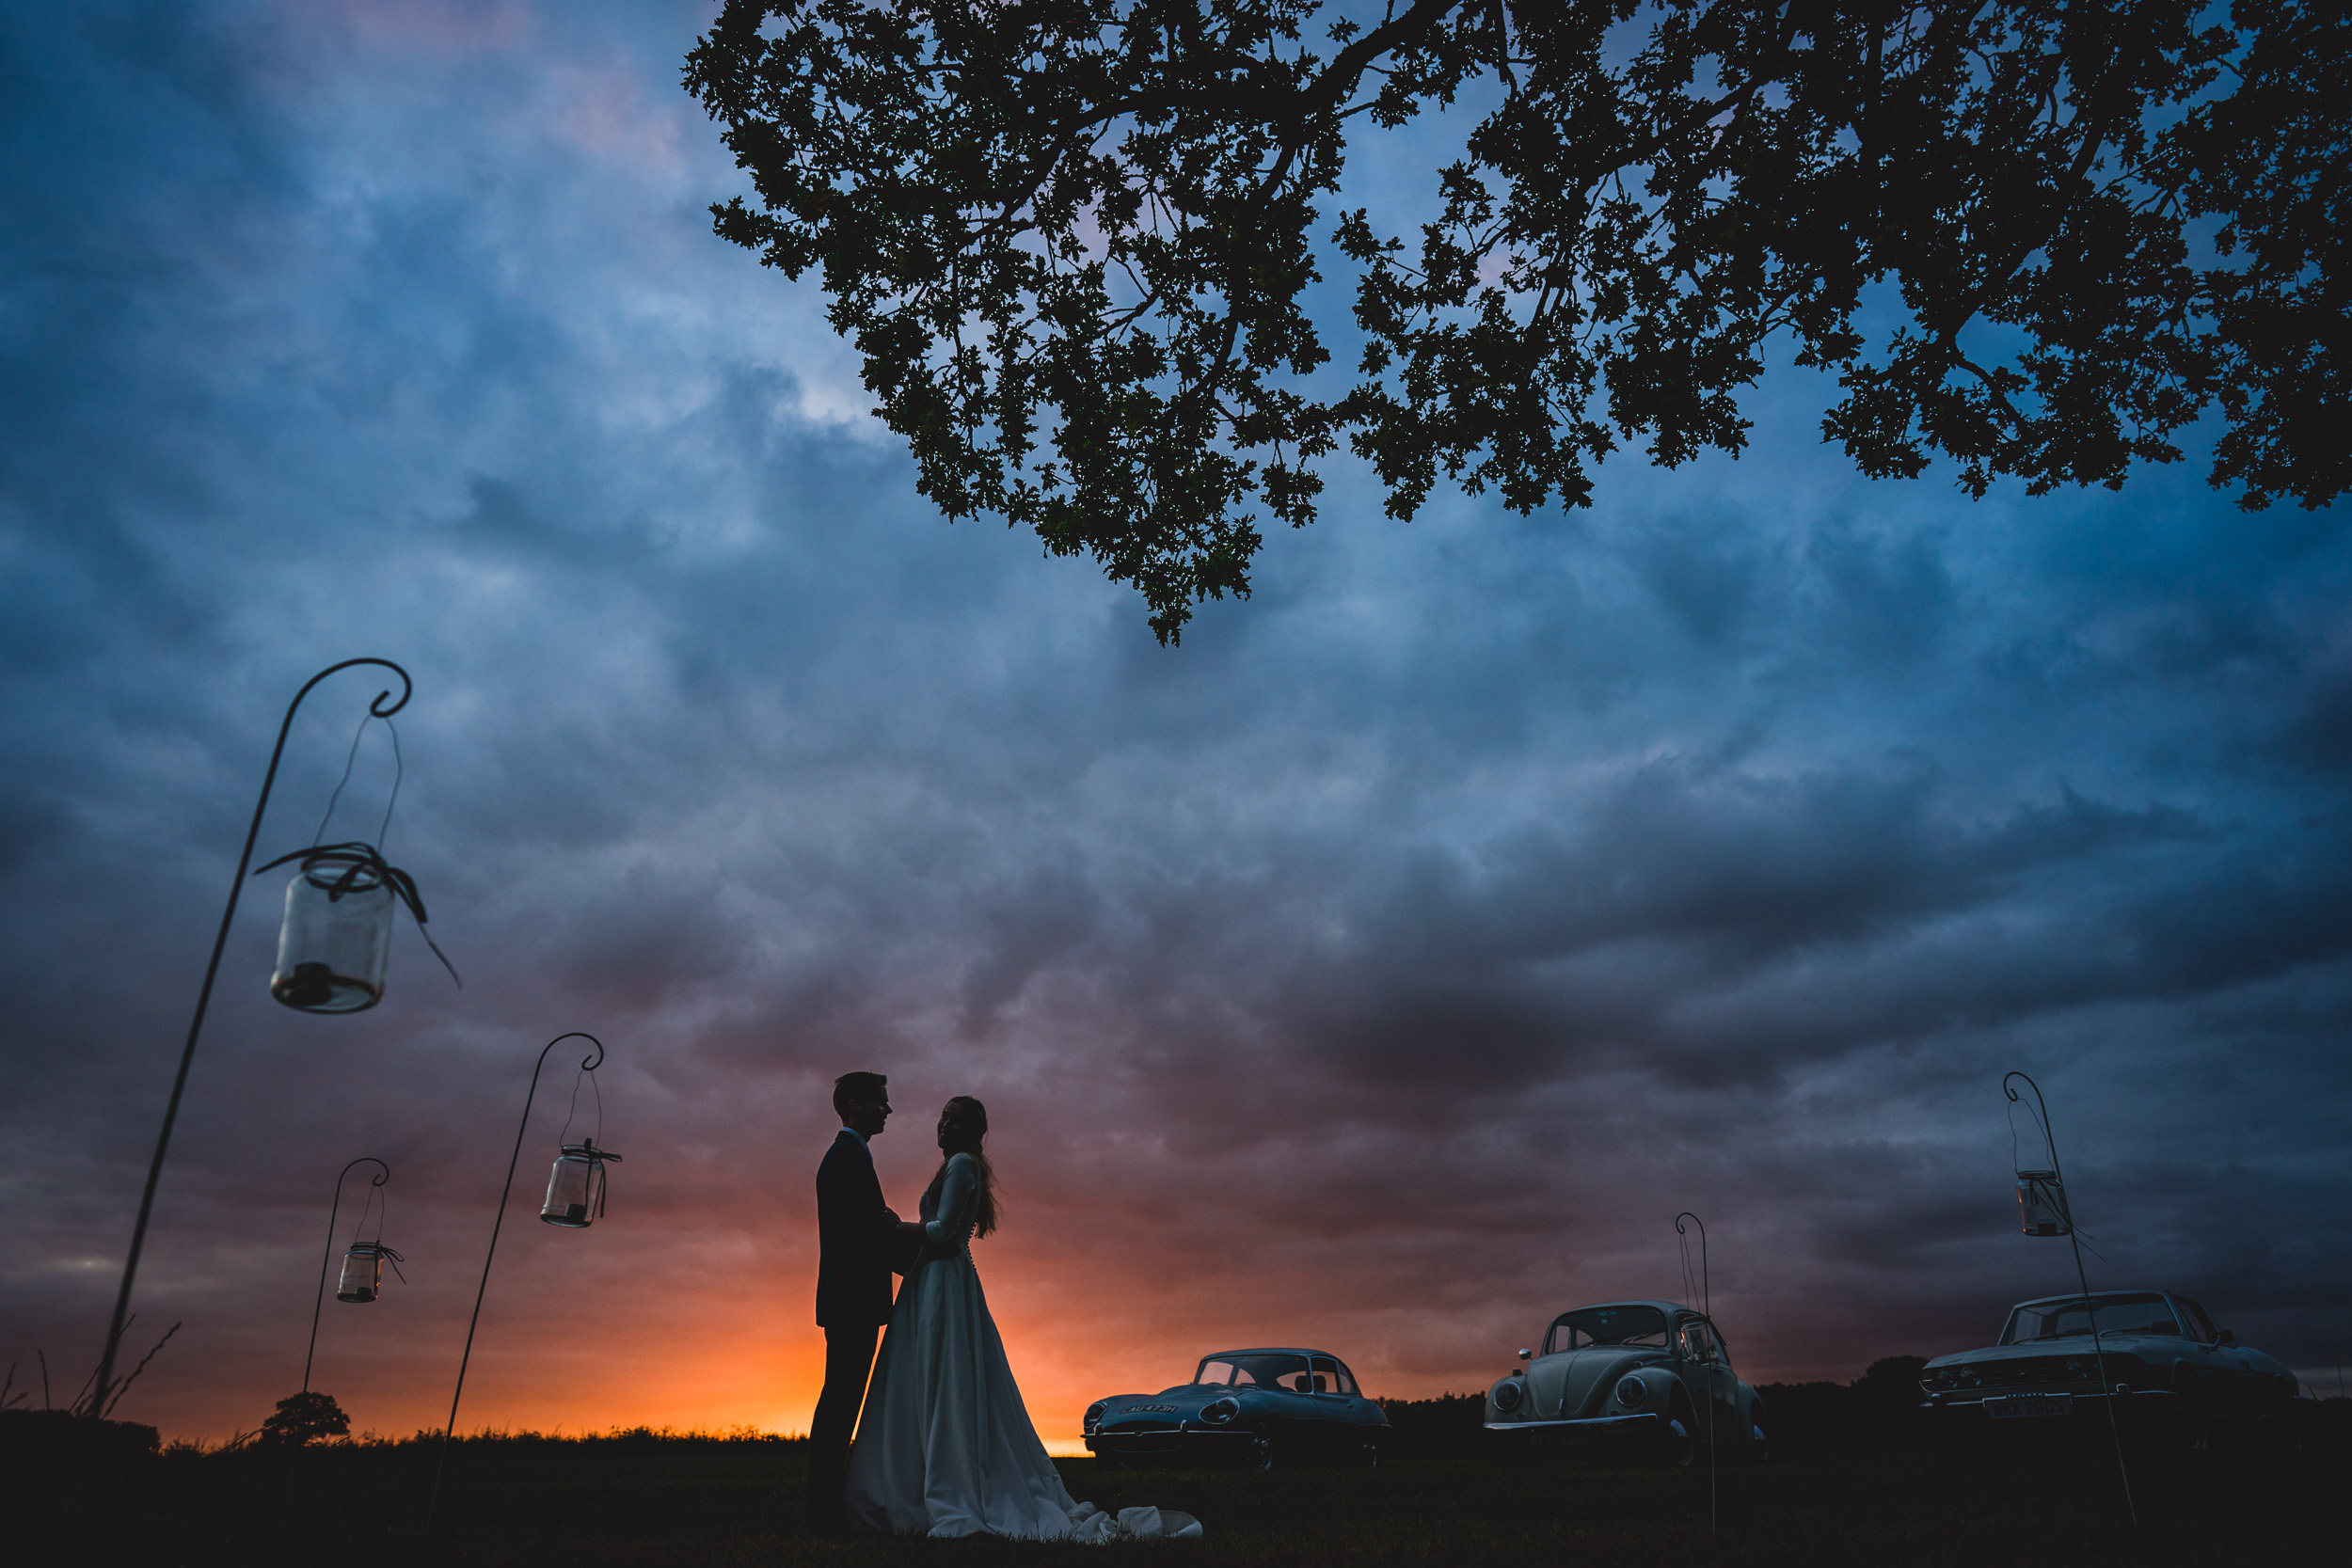 A wedding couple posed by a wedding photographer under a cloudy sky at sunset.